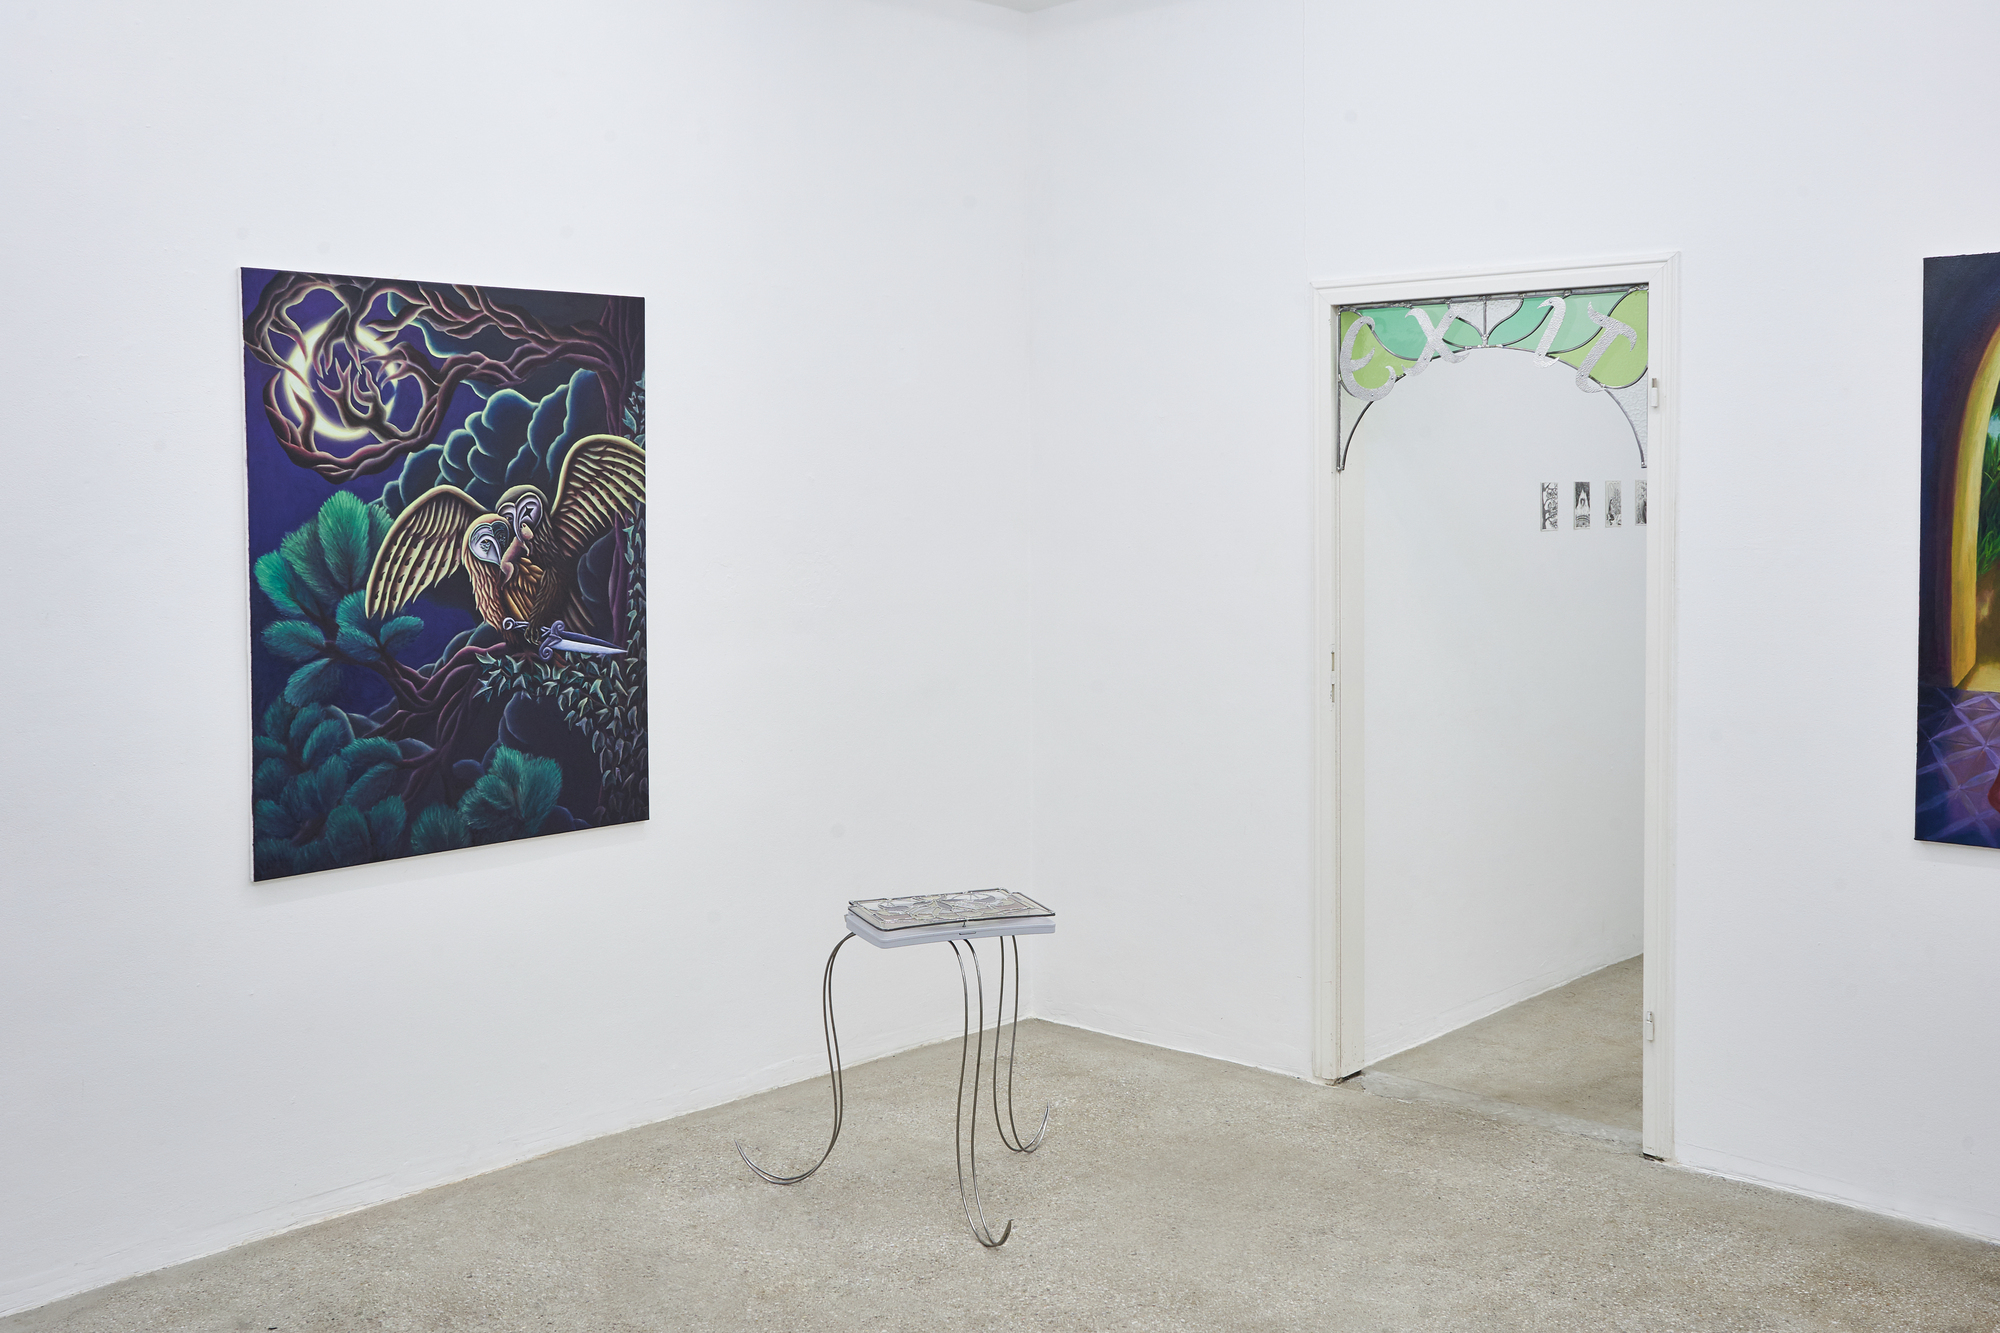 Exhibition view: works by Ju Young Kim and Chaeeun Lee